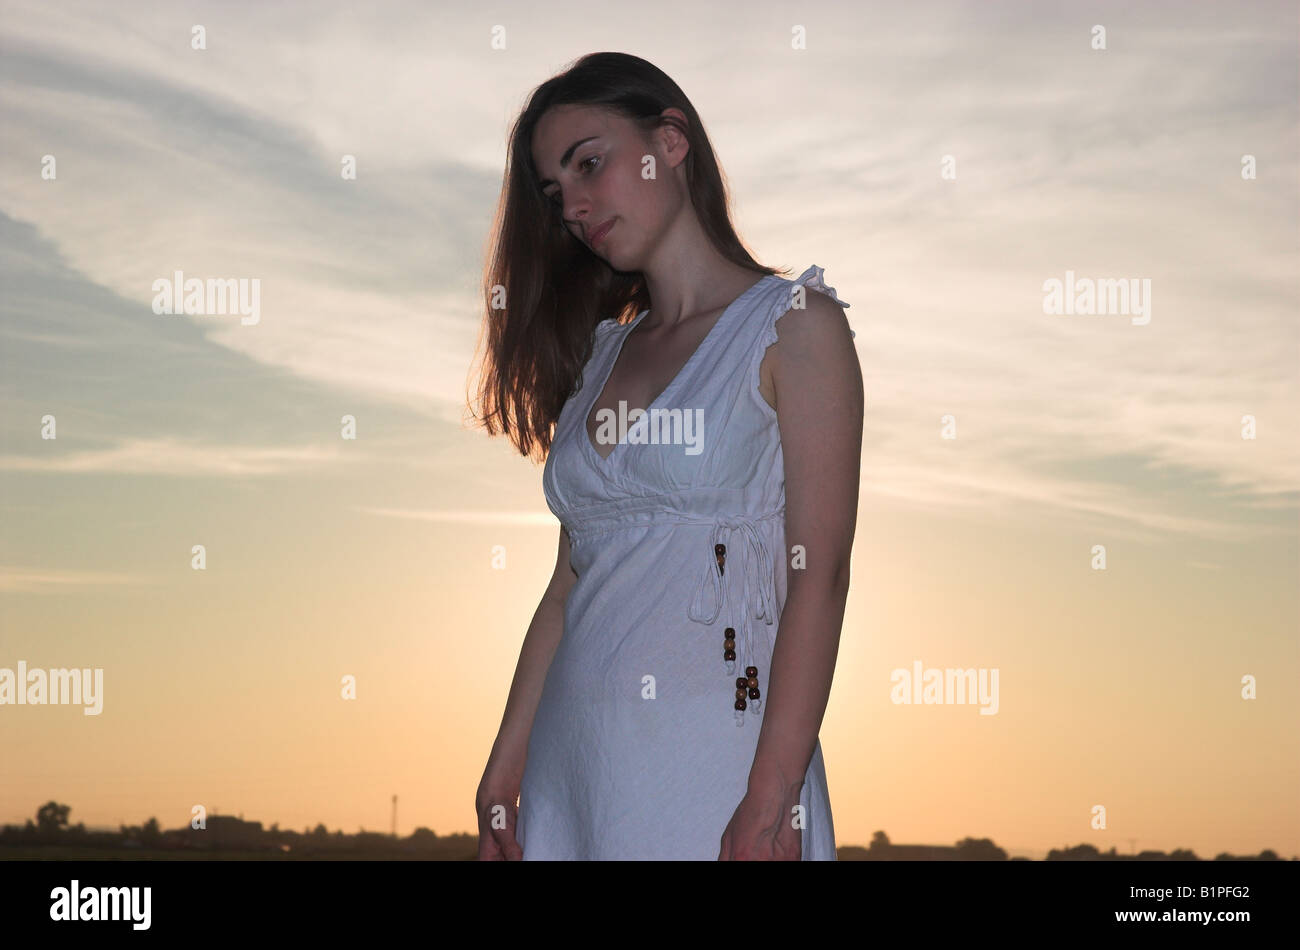 Silhouette of a young woman wearing white dress standing outdoors at dusk sun shining behind head bowed Stock Photo